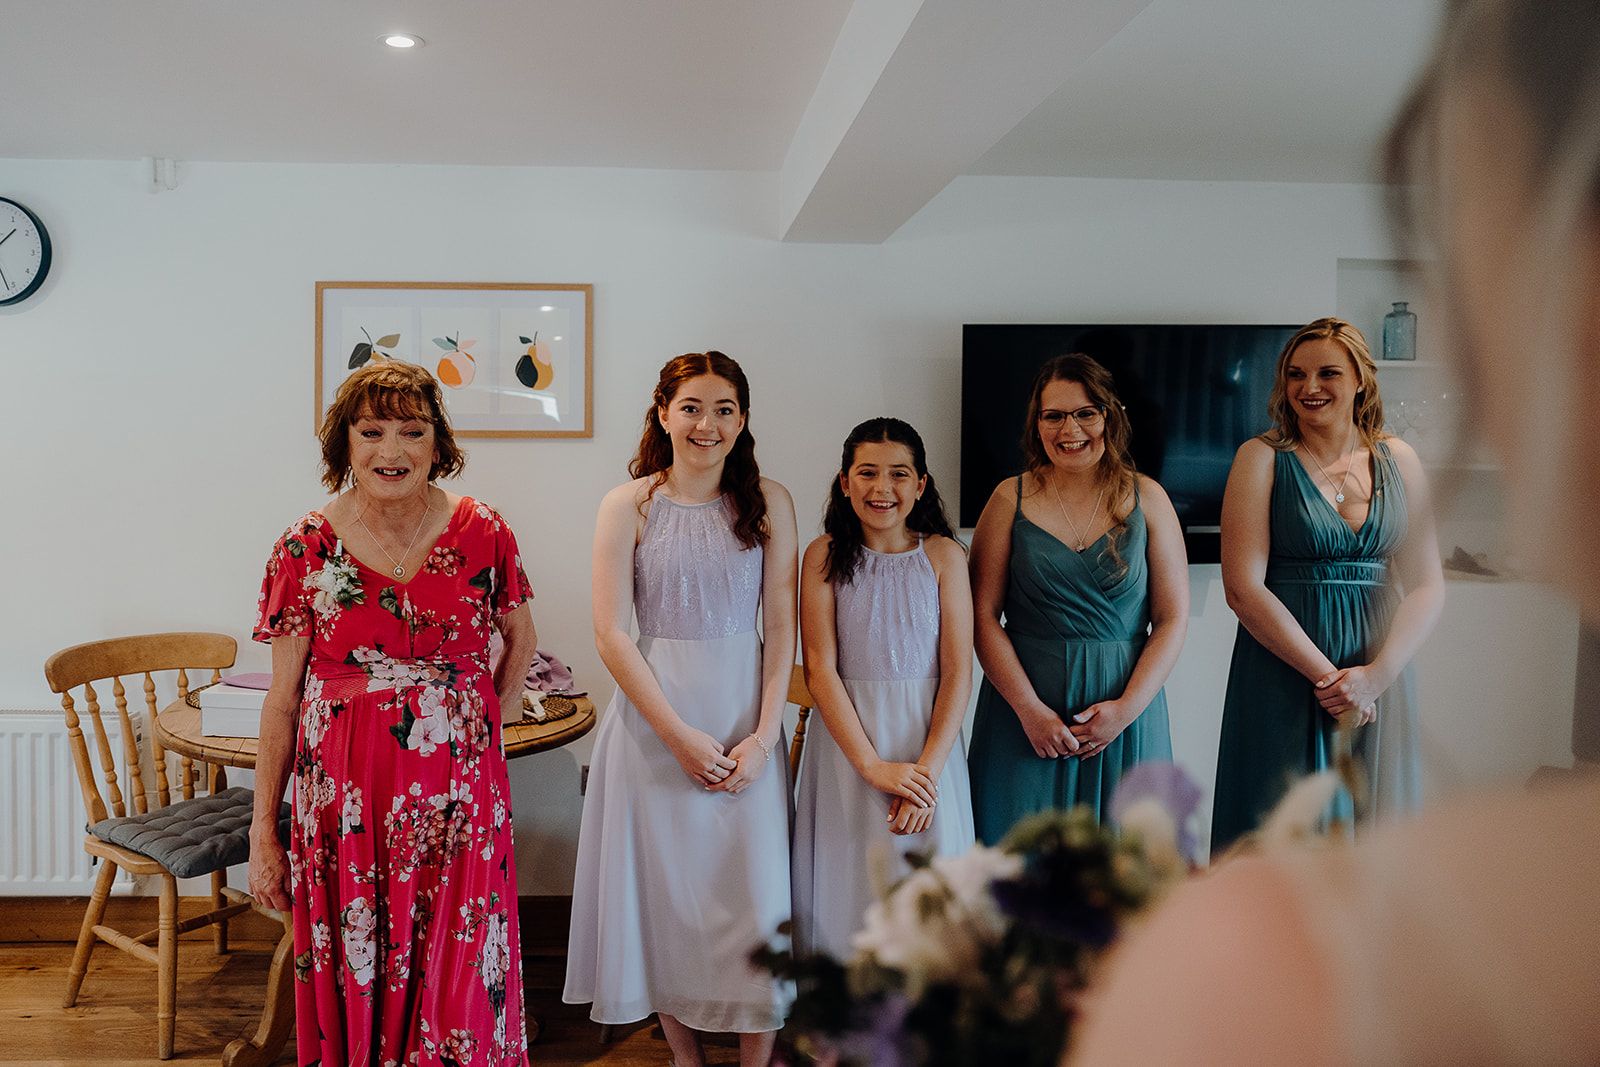 Georgie's Mum and bridesmaids first reaction to seeing her in her wedding dress with her bouquet. So many smiles and happy tears. Photo thanks to Sam and Steve Photography. 